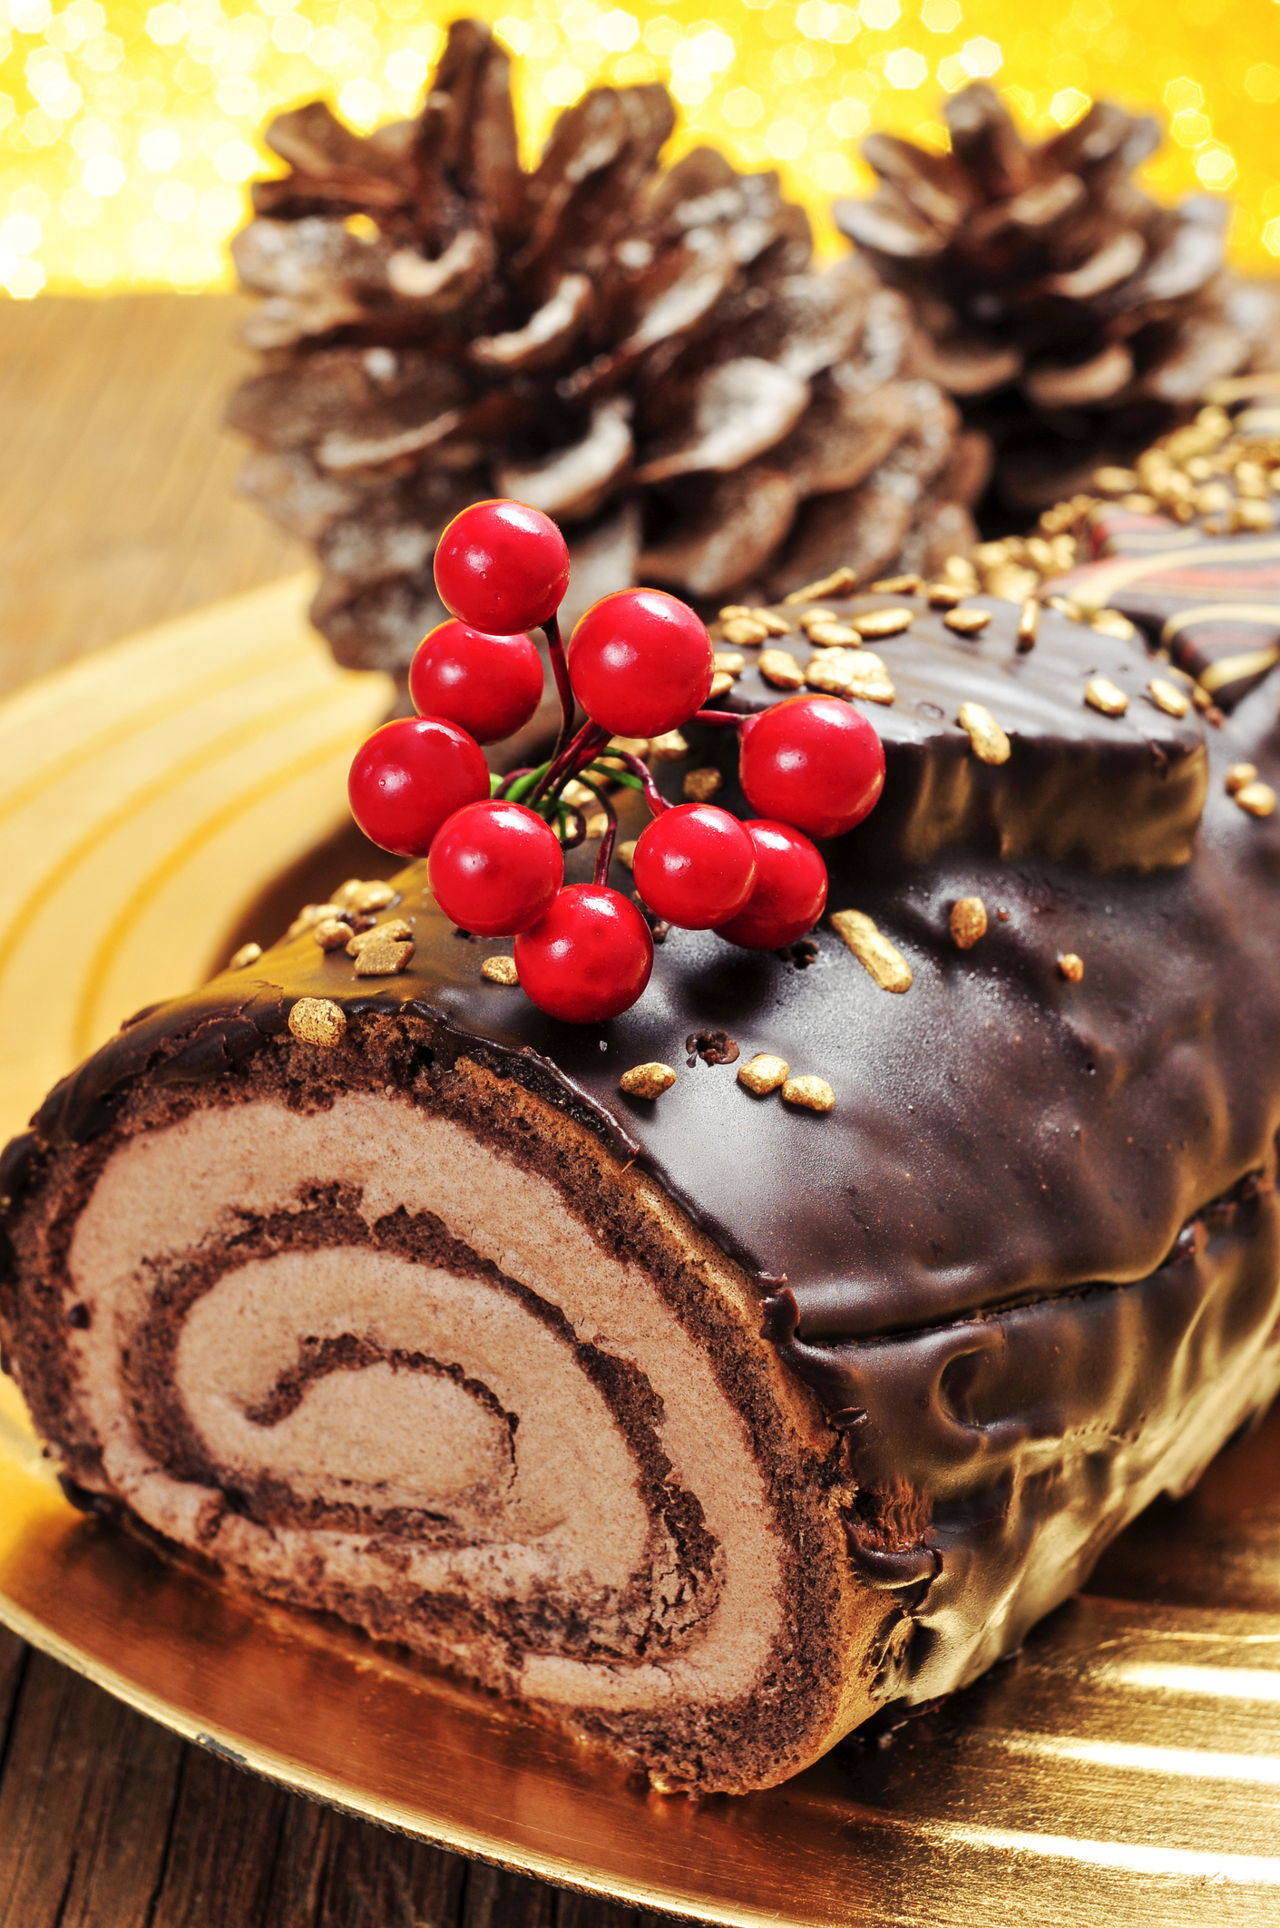 History of the Delicious Buche de Noel and How it is Made - Celebration Joy